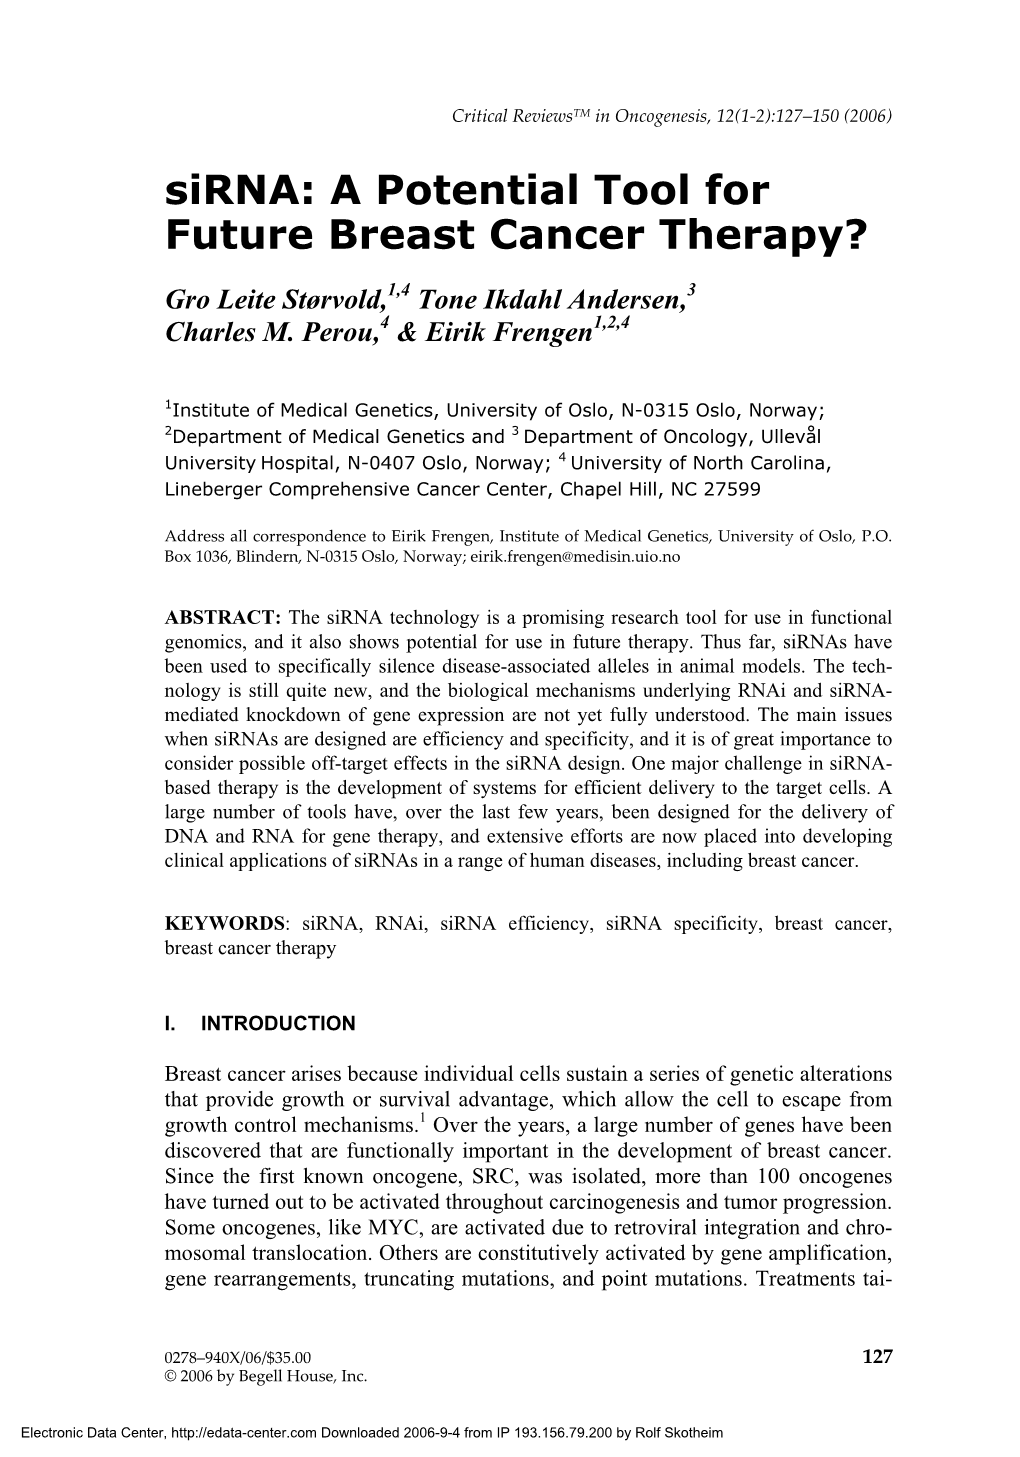 Sirna: a Potential Tool for Future Breast Cancer Therapy?